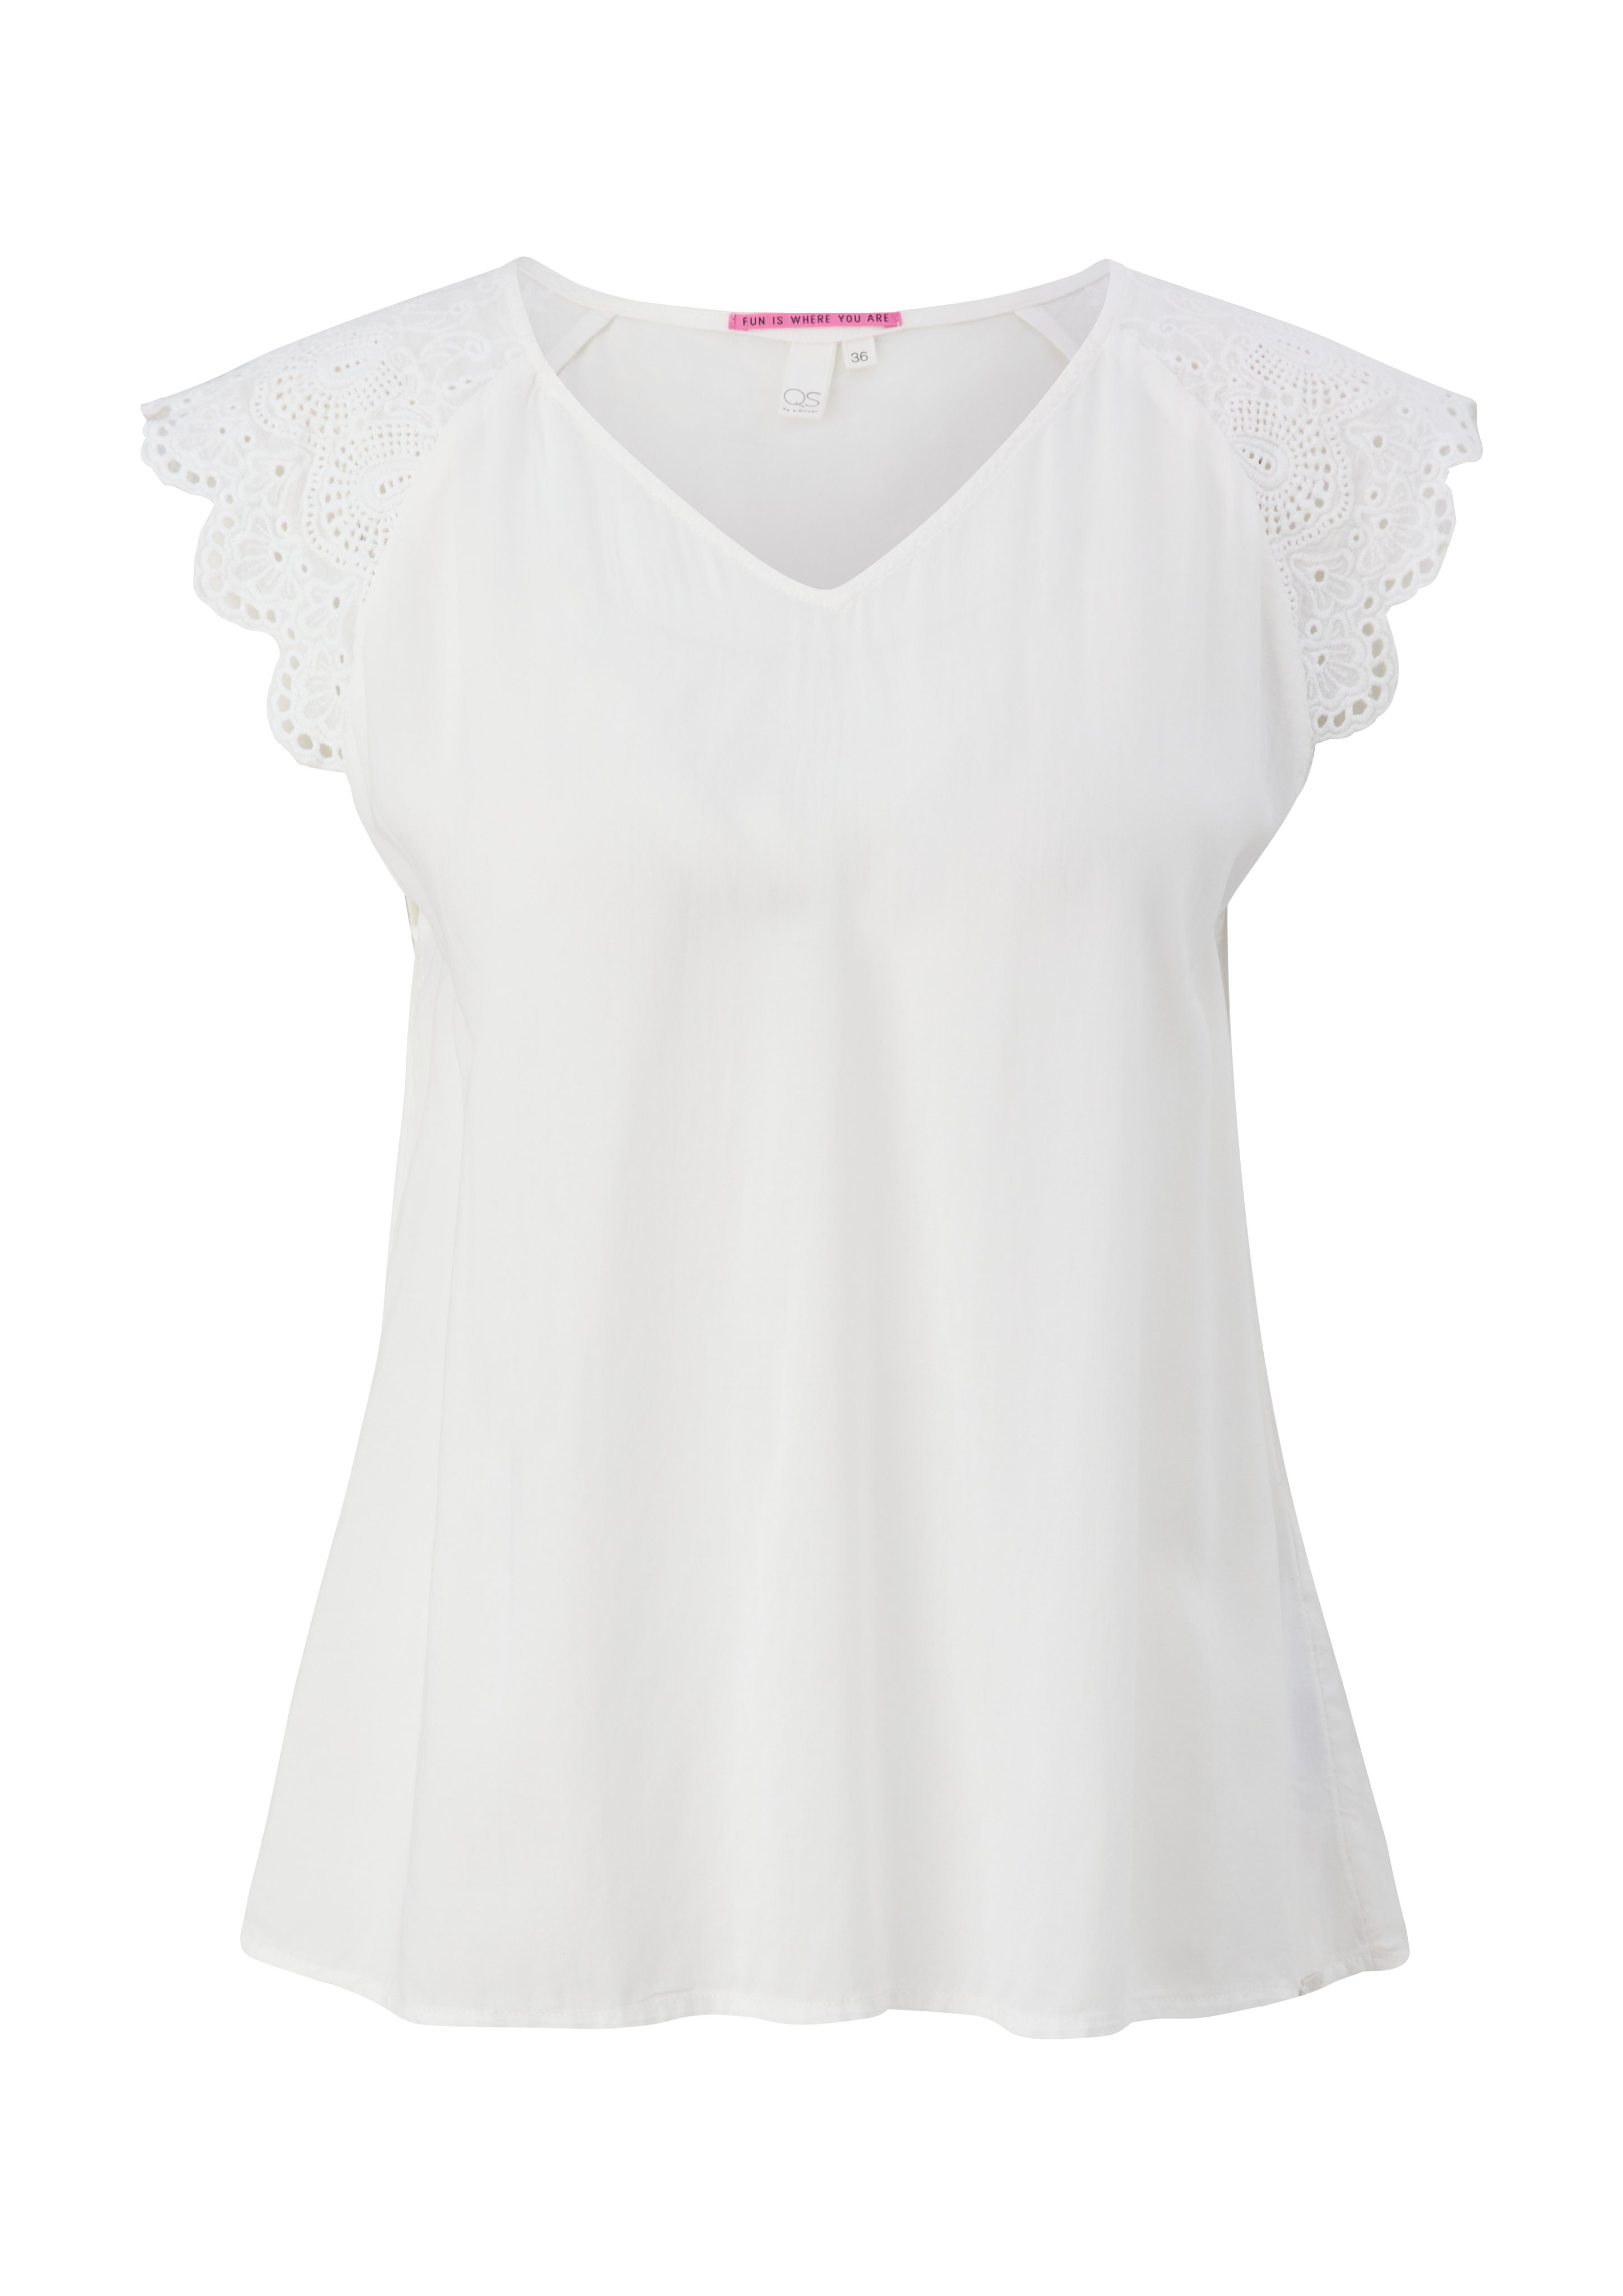 Broderie mit Anglaise Bluse Blusentop ecru QS